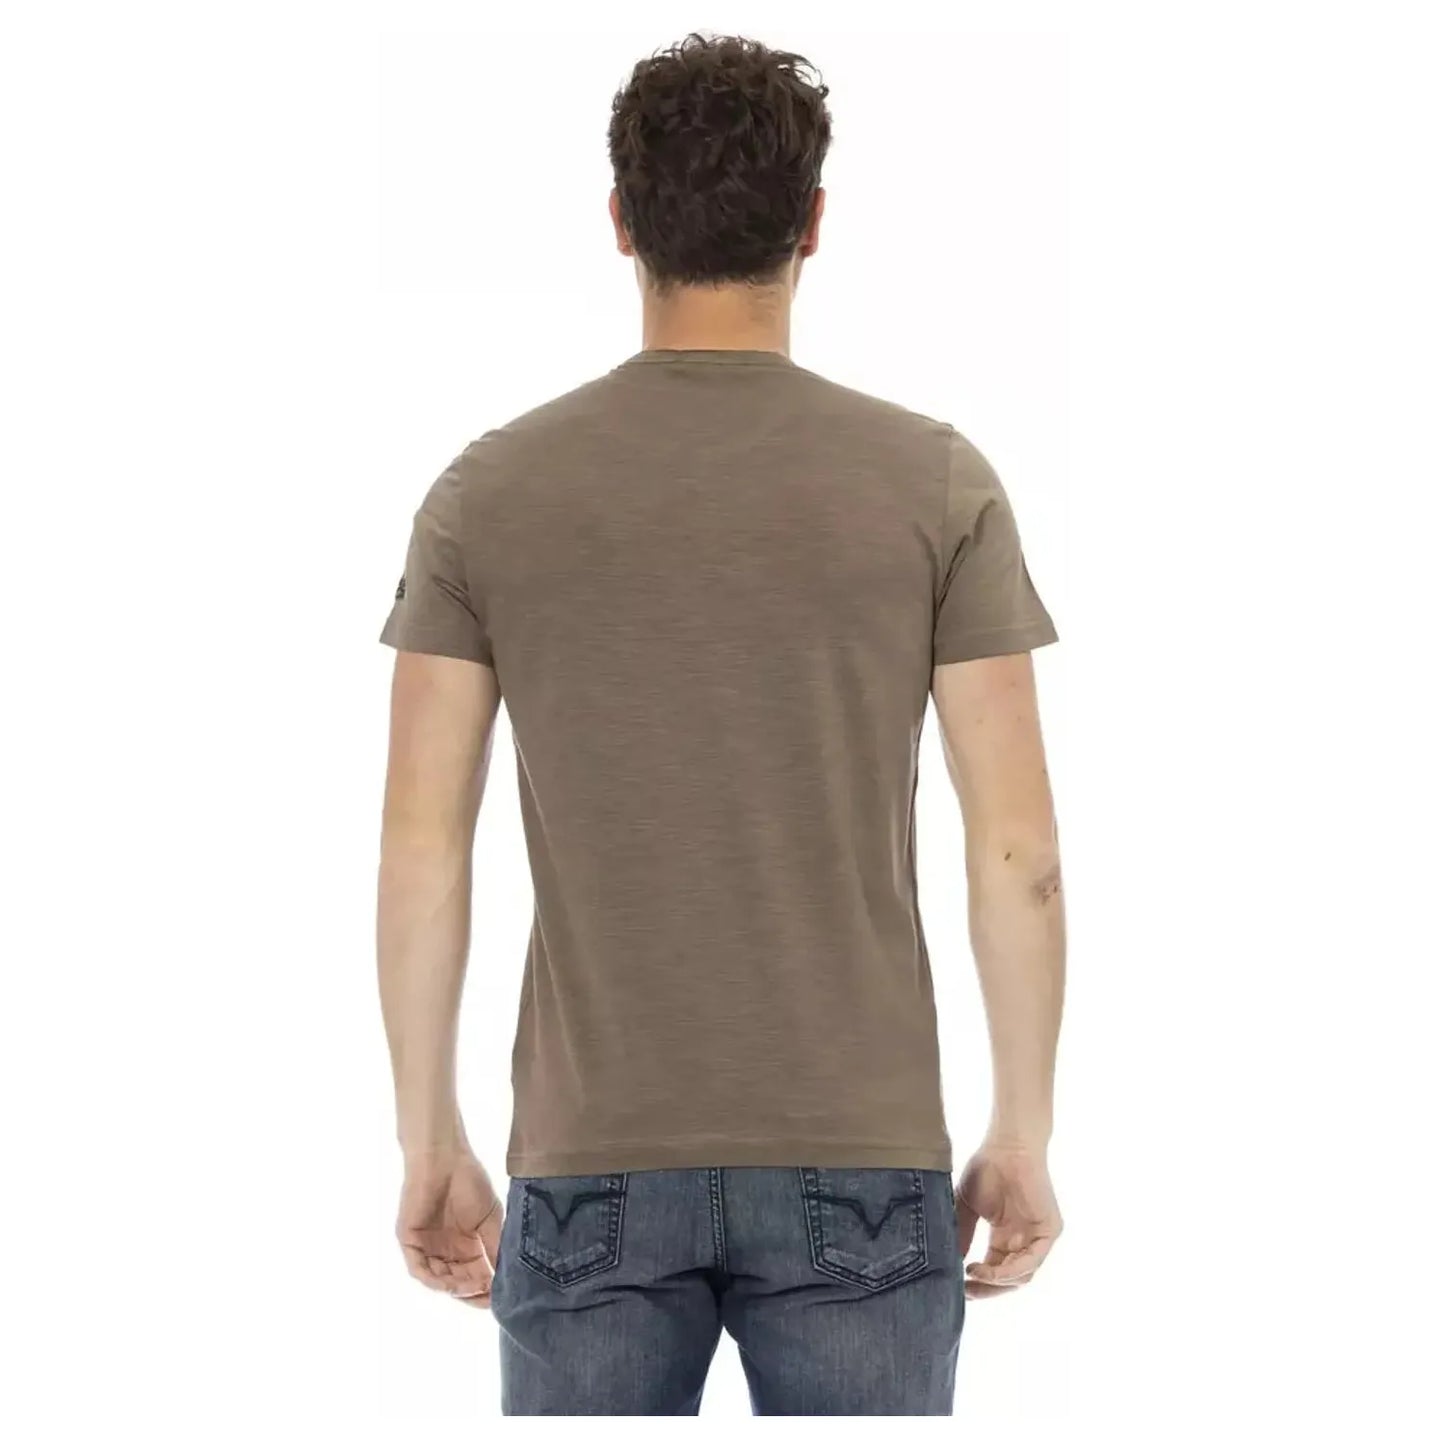 Trussardi Action Elegant Brown Tee with Chic Front Print brown-cotton-t-shirt-5